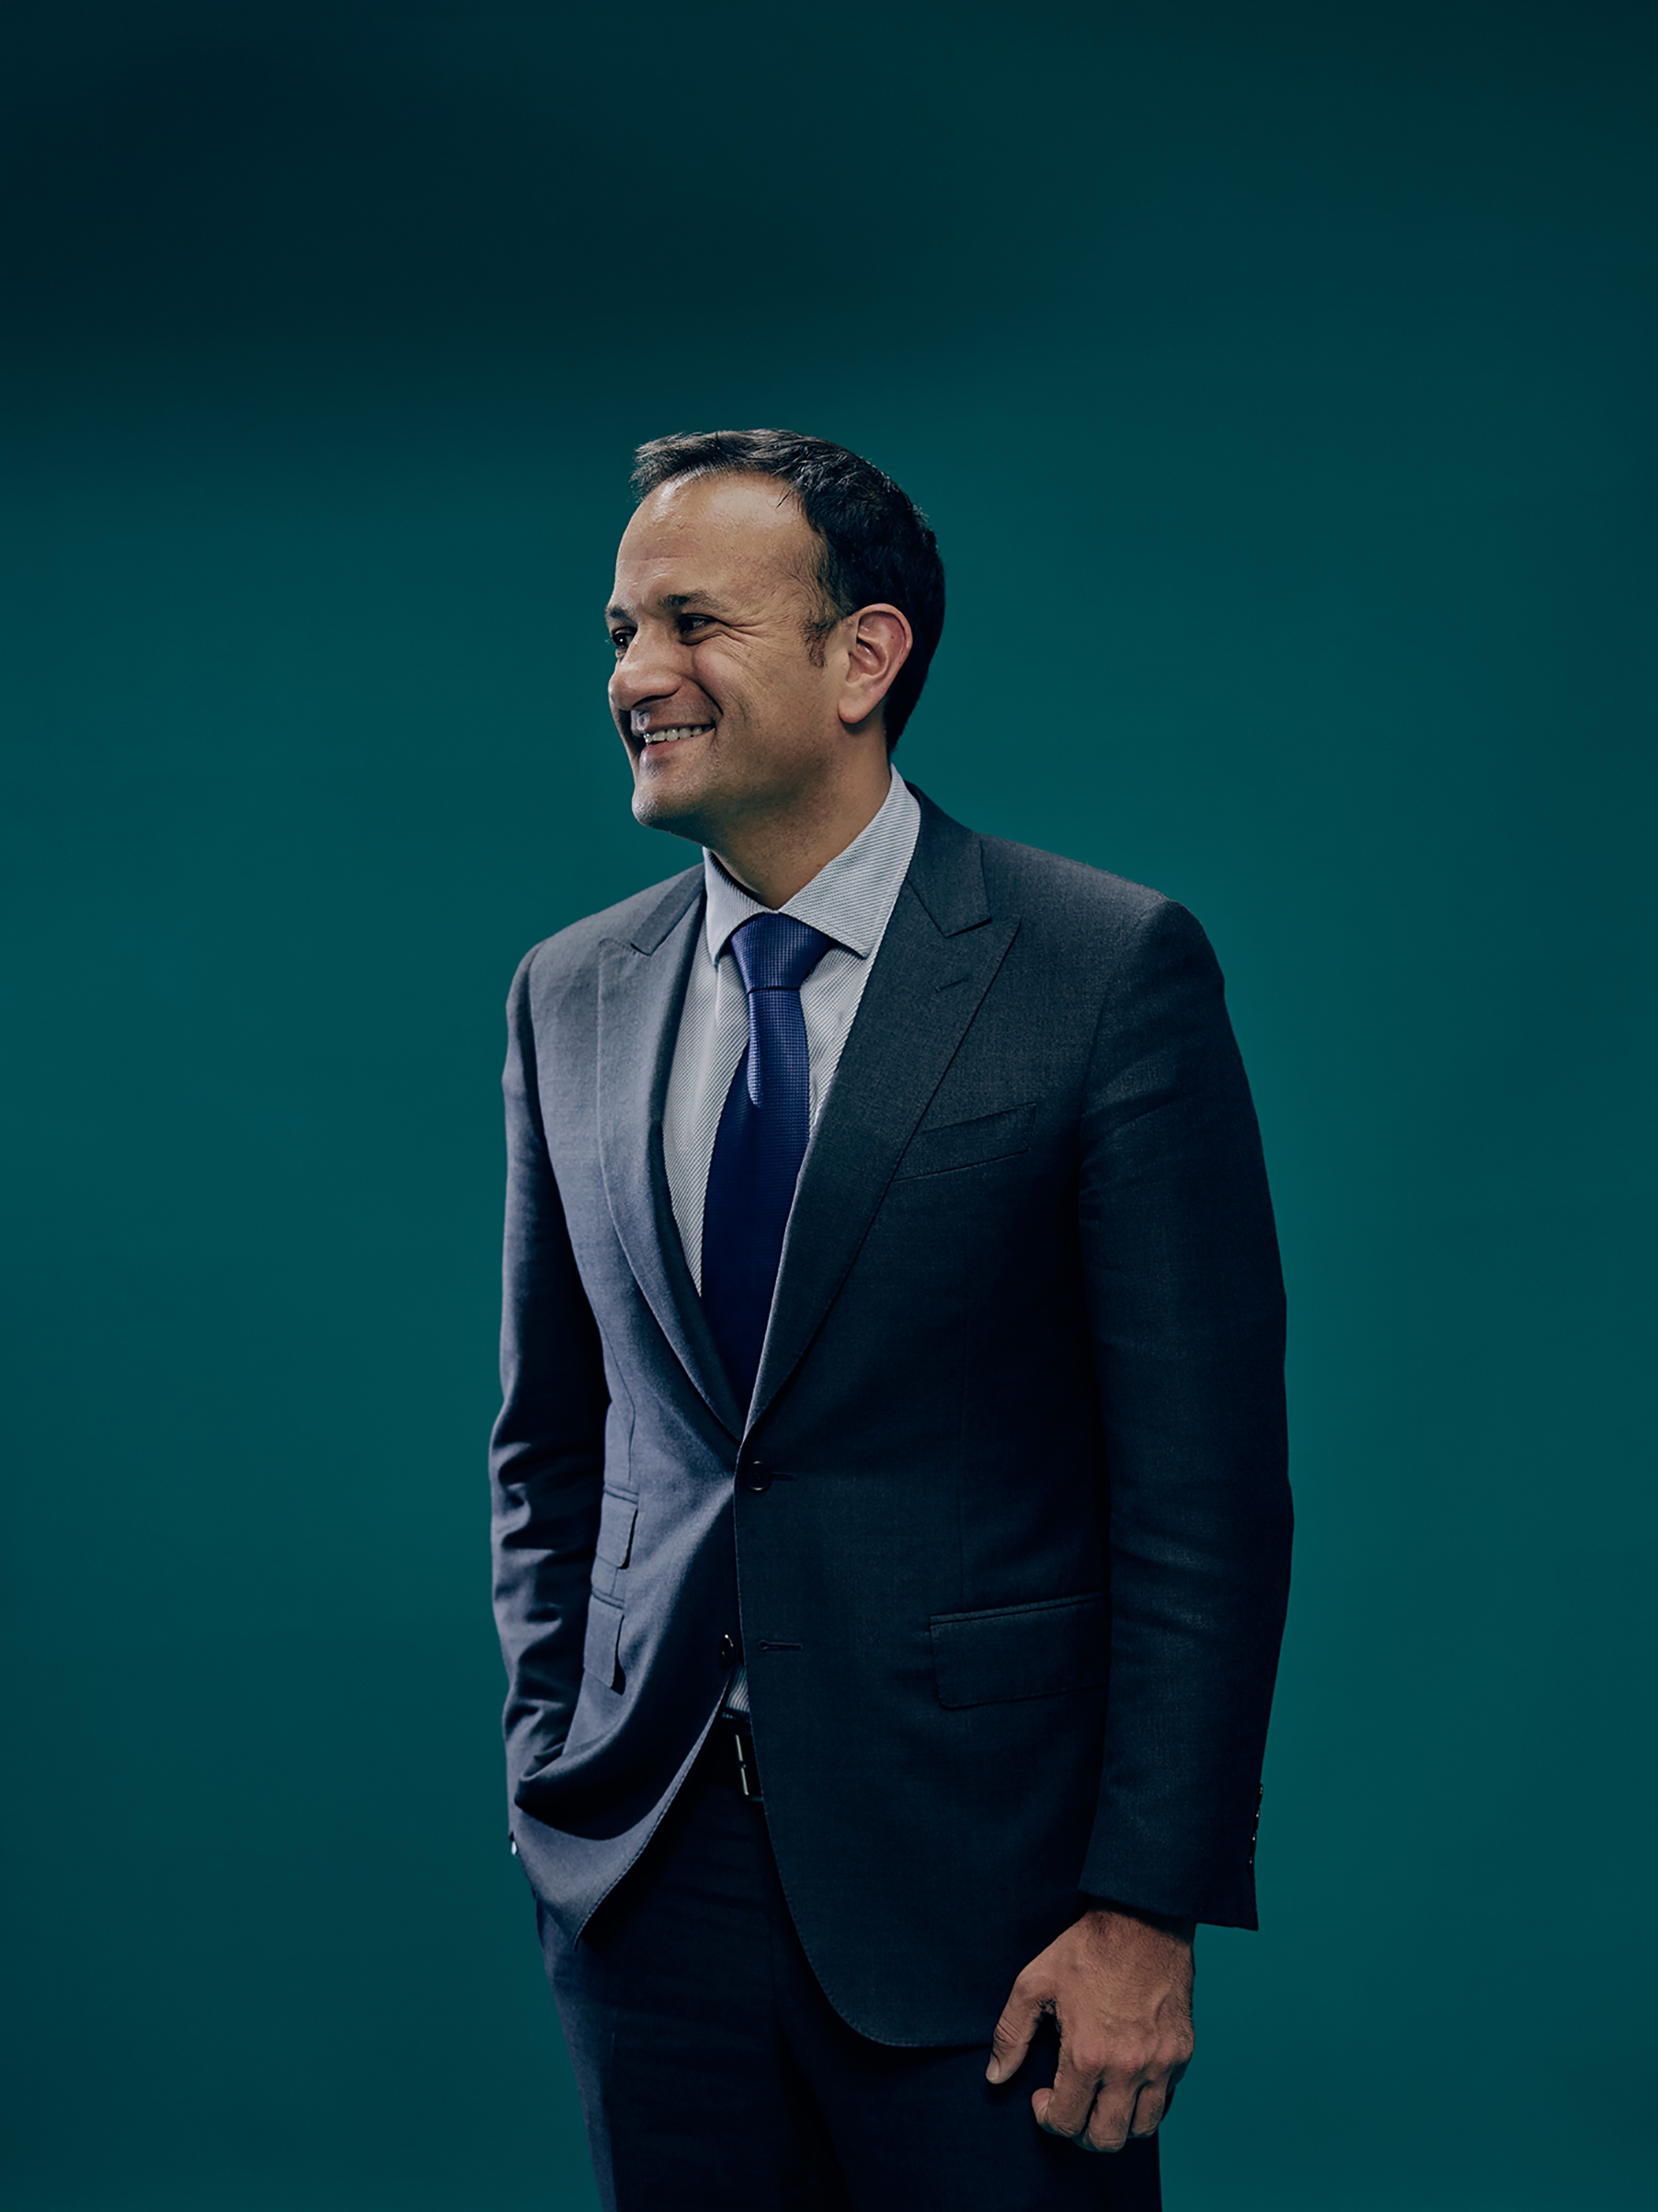 The new Irish Prime Minister Leo Varadkar poses for a portrait at the Irish Parliament in Dublin, Ireland on July 7, 2017.